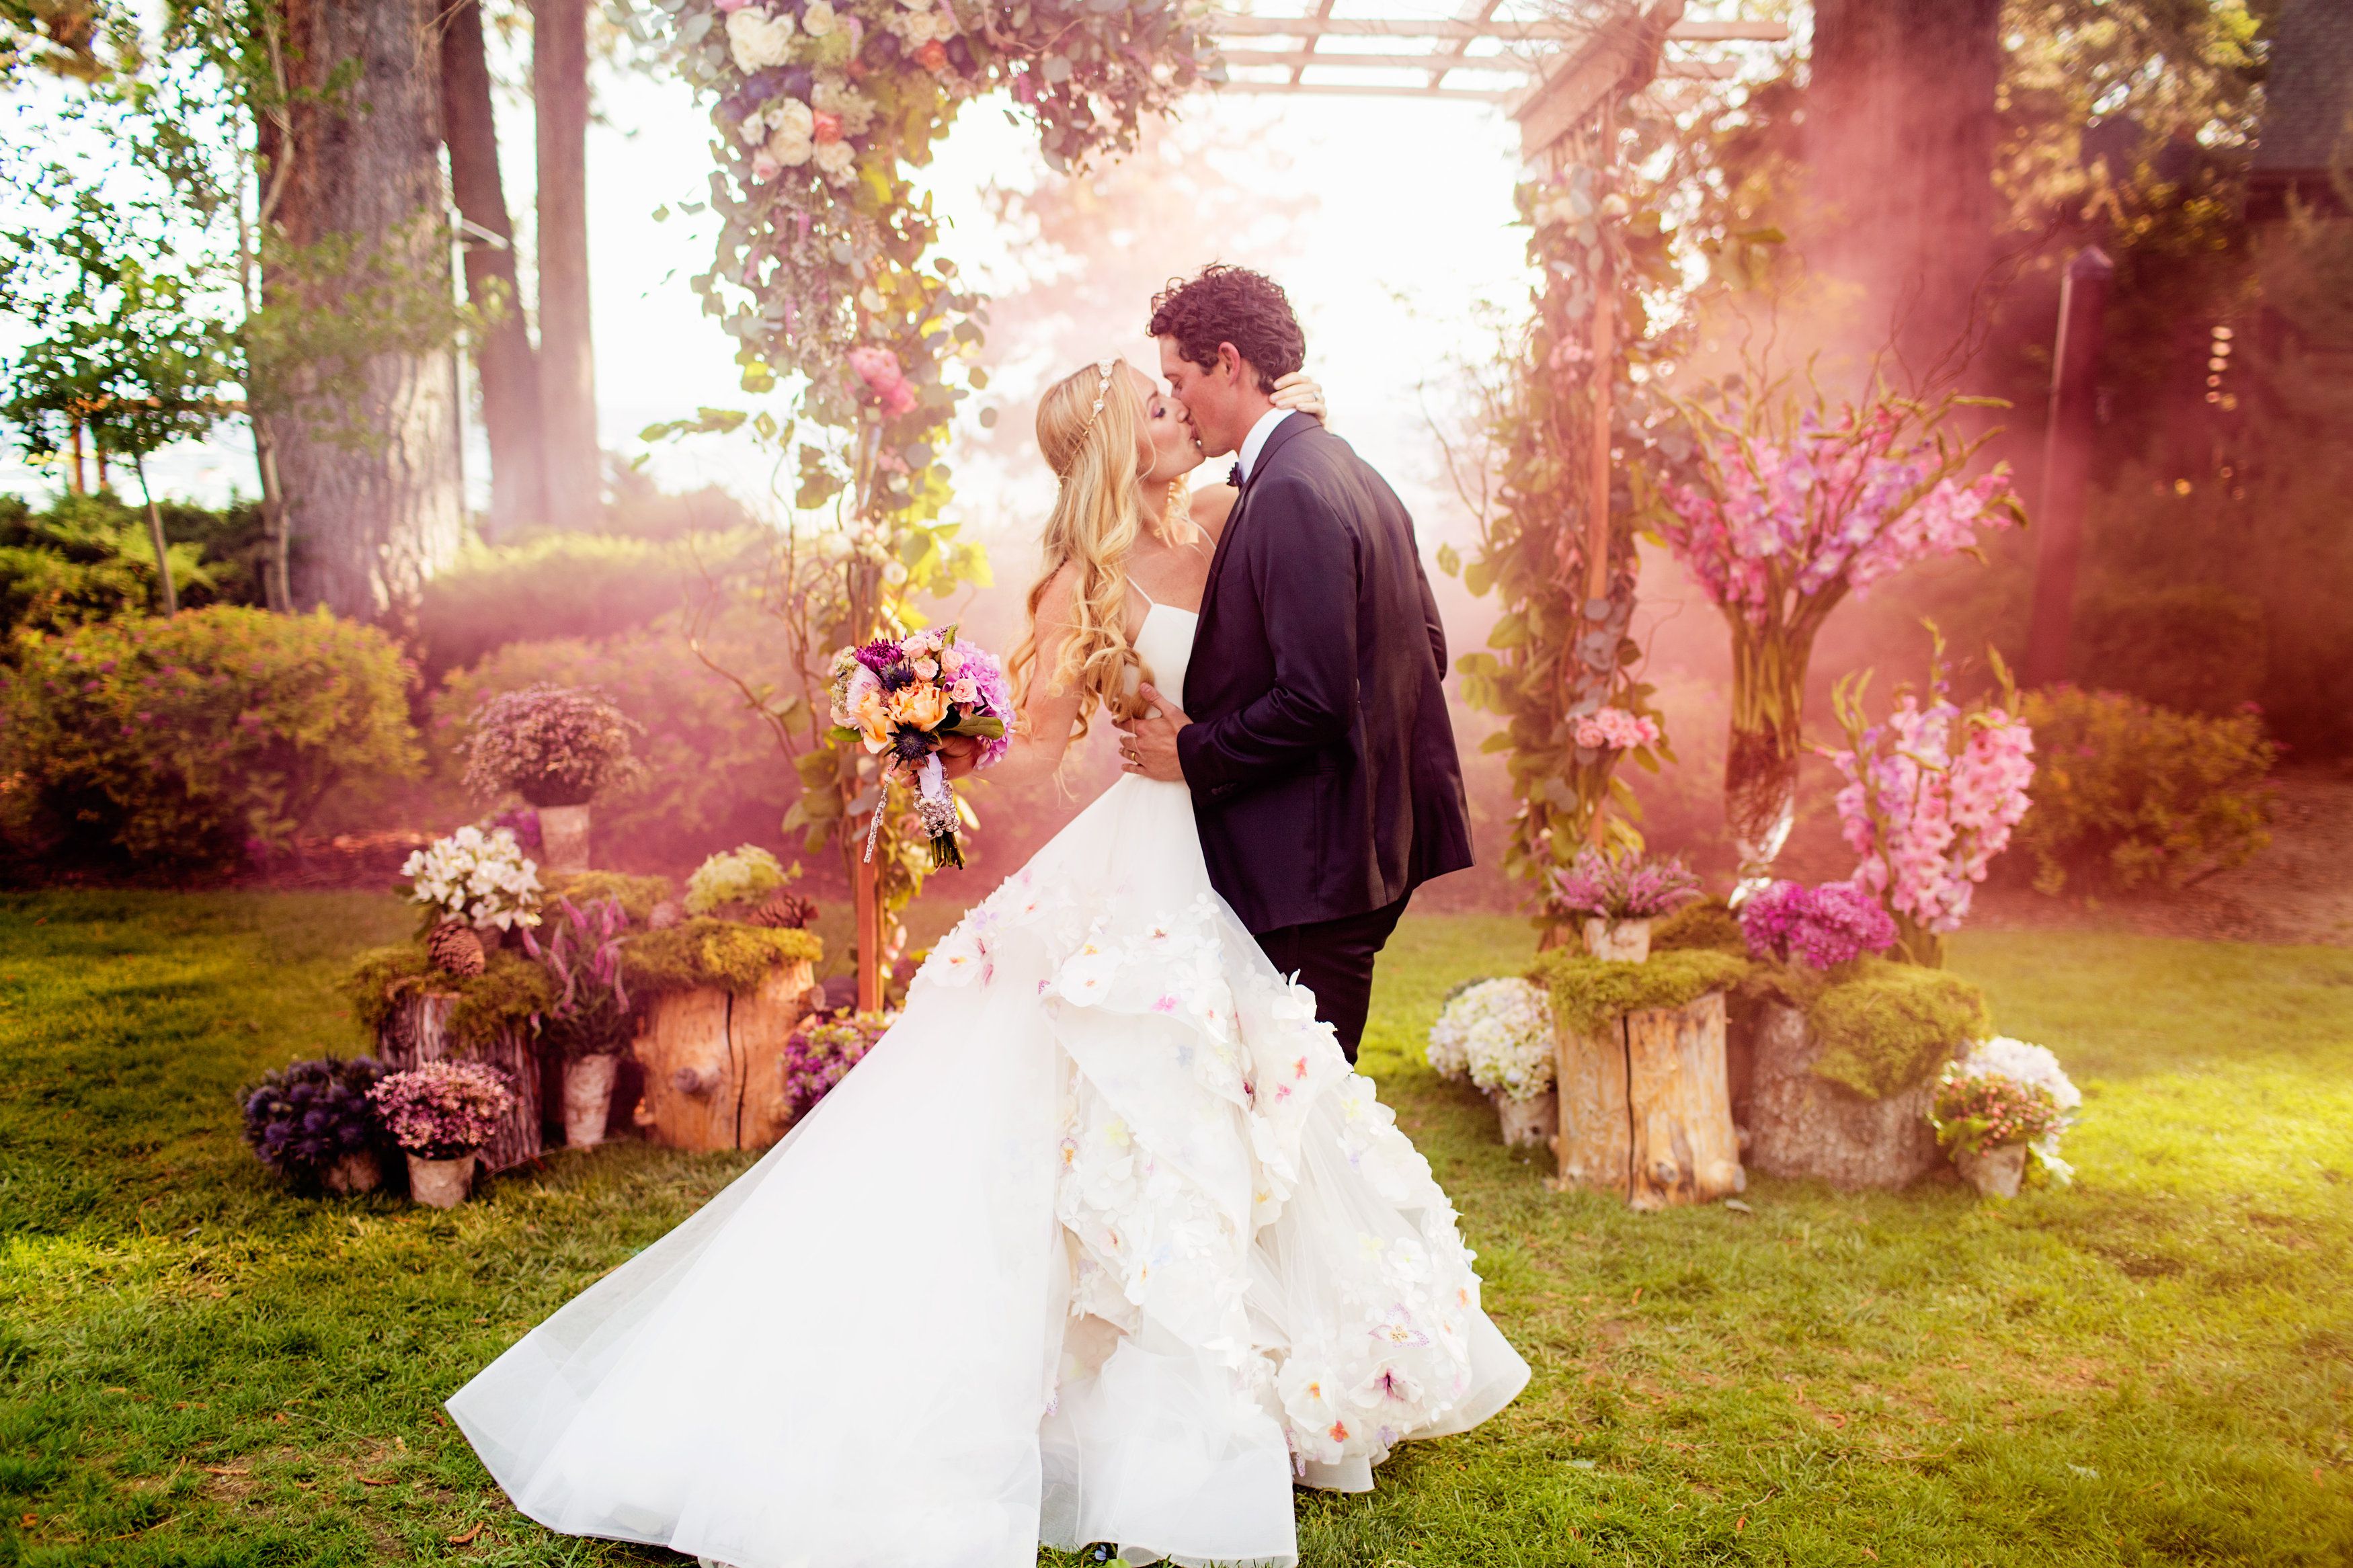 Wedding Dress Shopping - What to Know Before Buying a Wedding Dress